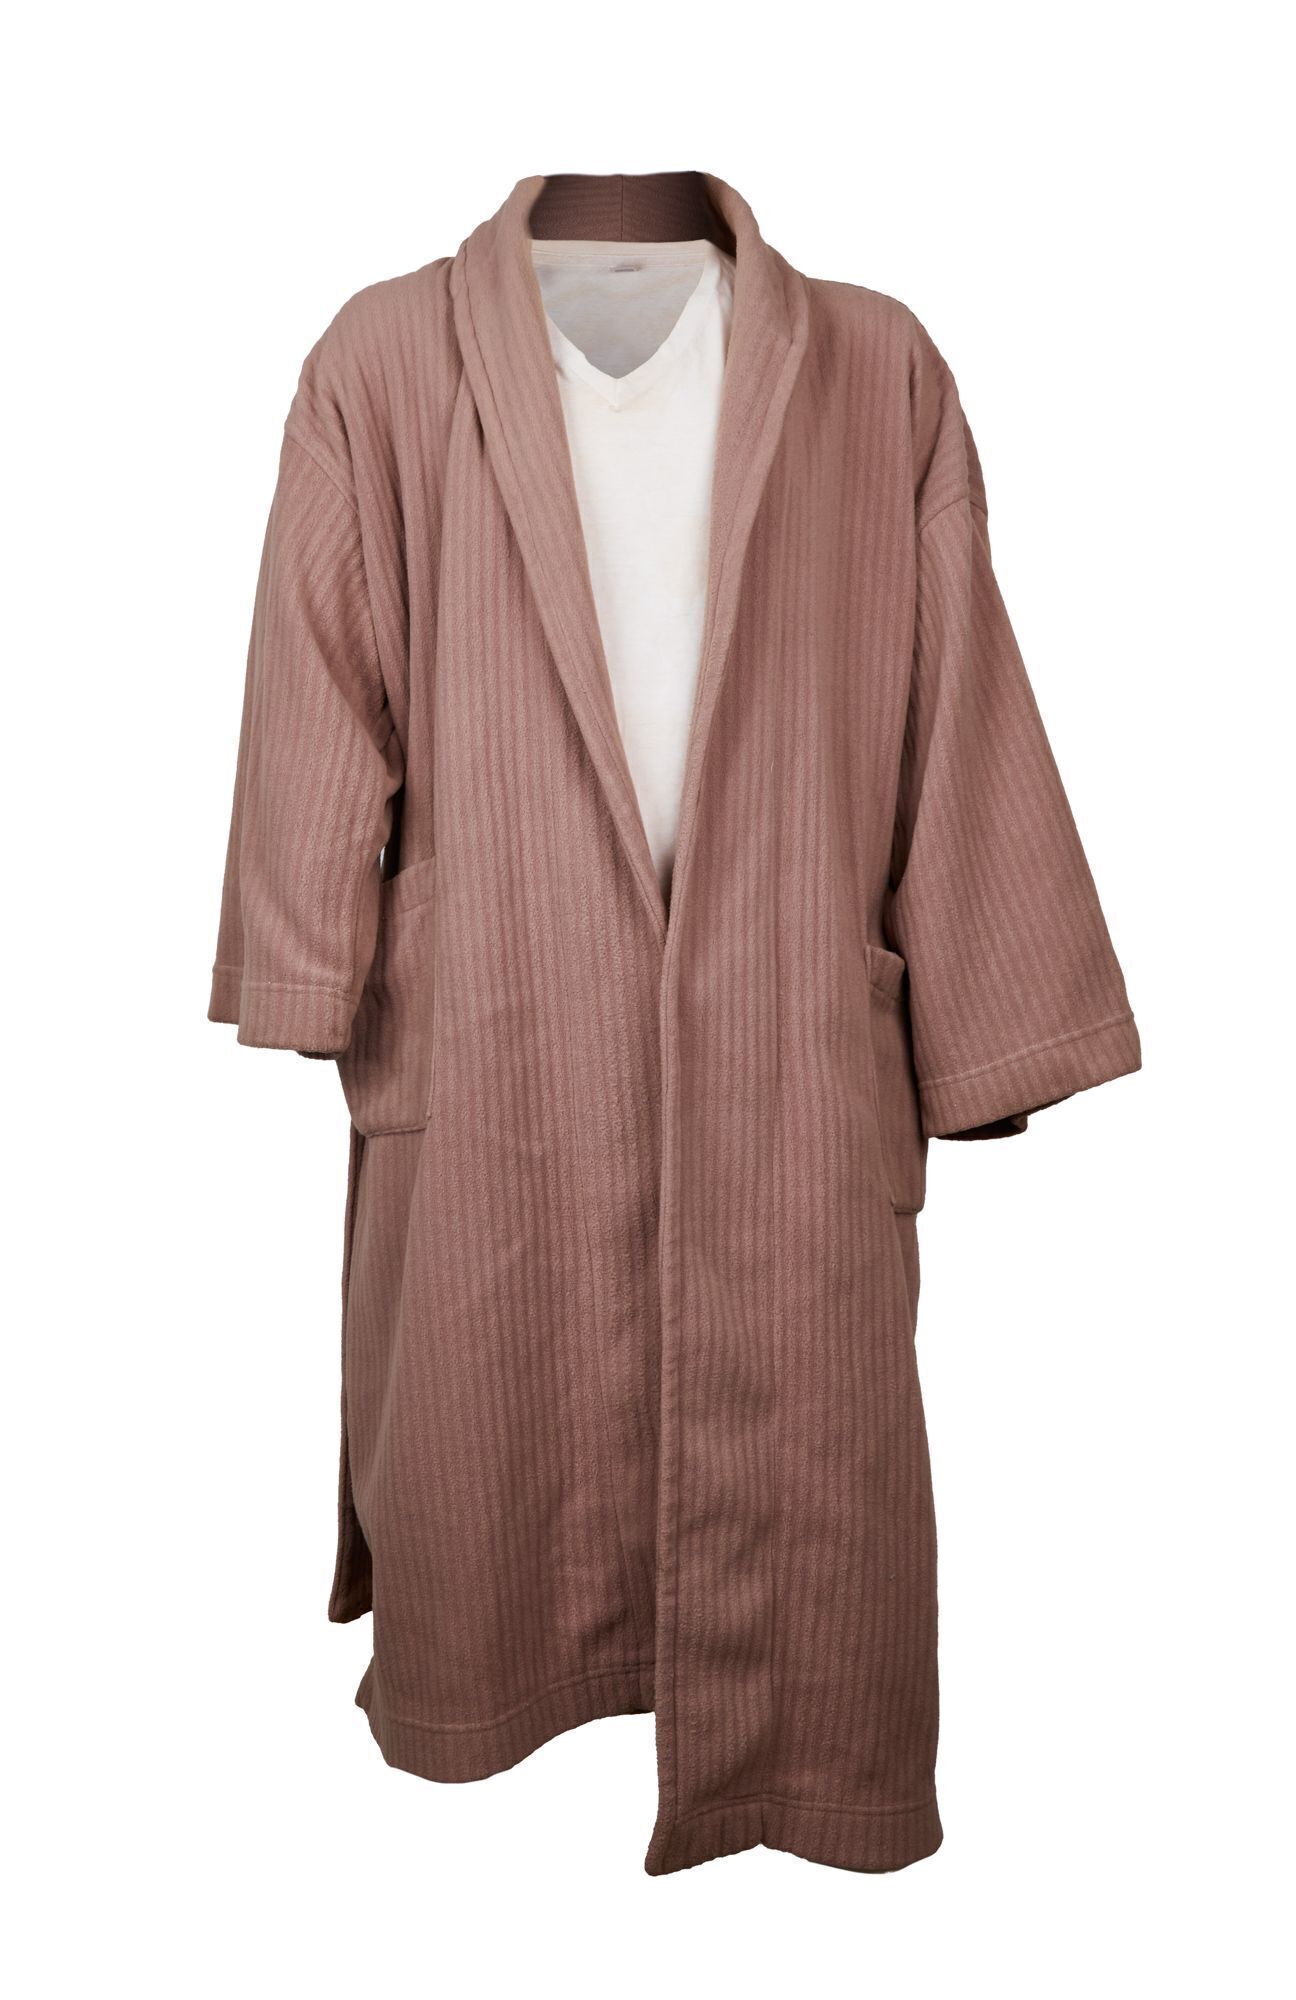 a dressing gown and t-shirt worn by actor Jeff Bridges as the character The Dude in the movie the Big Lebowski.